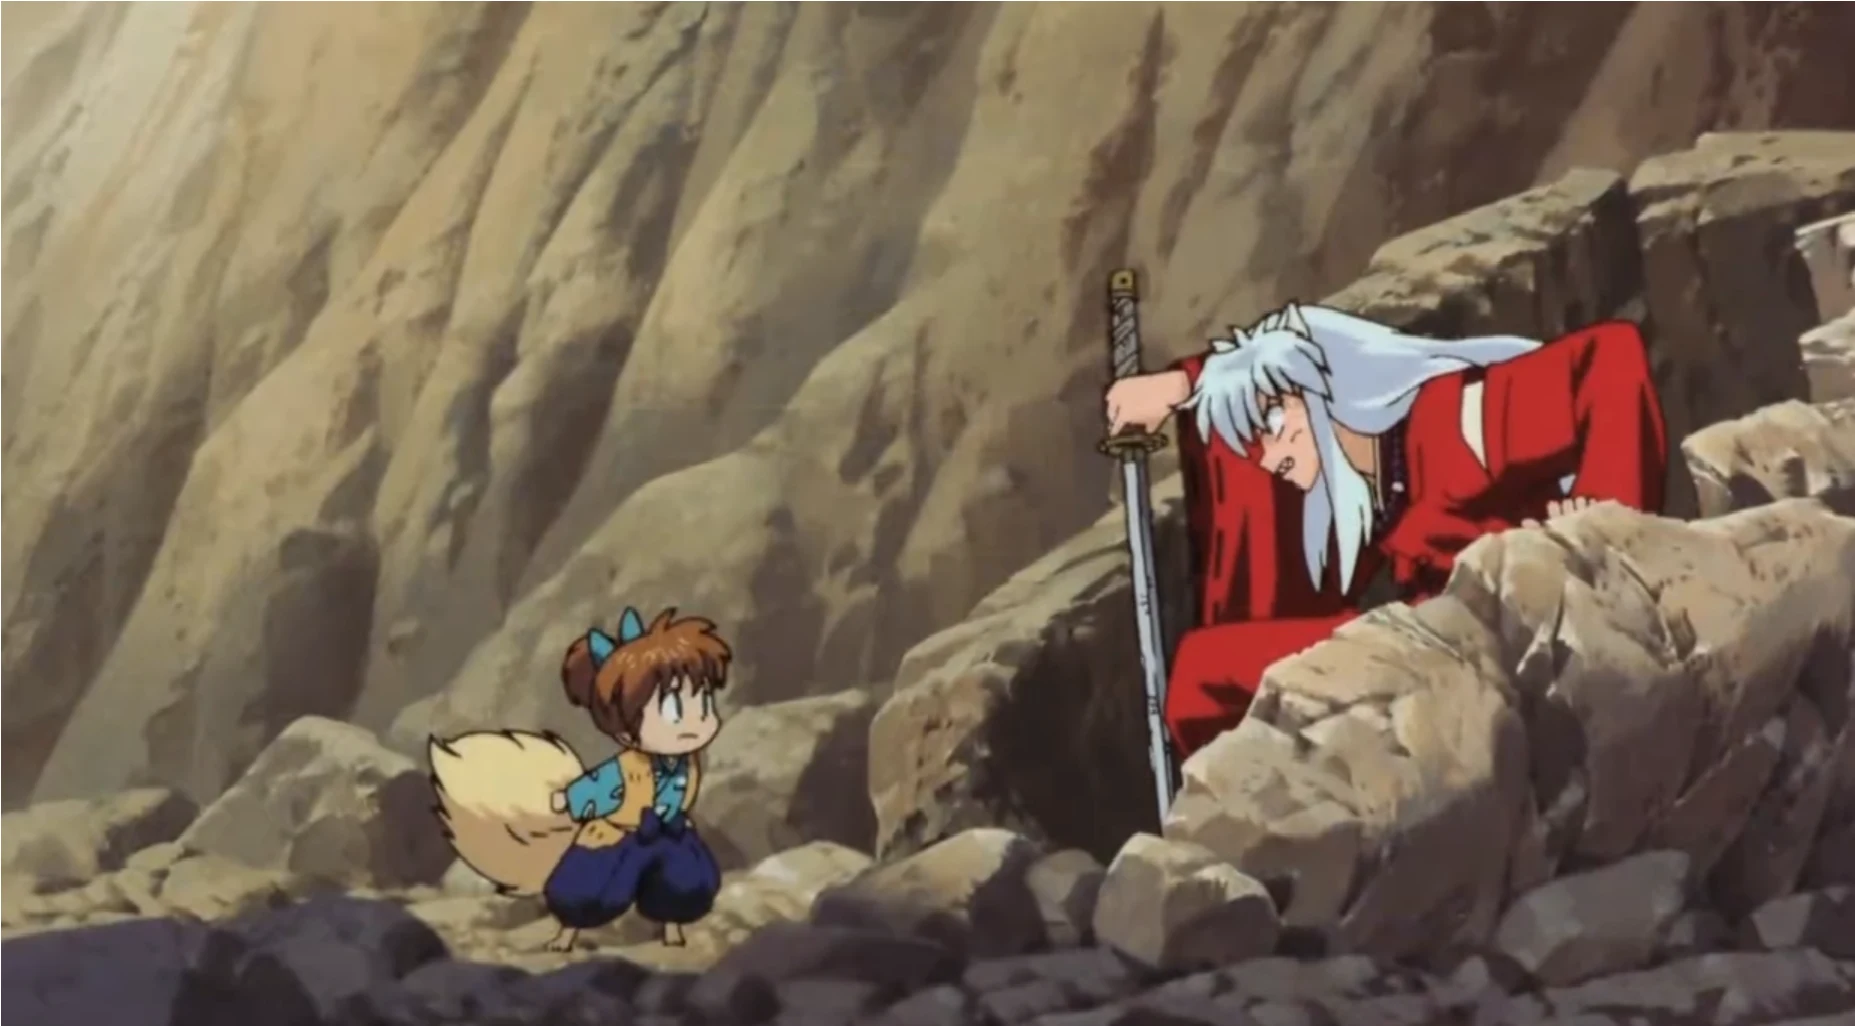 Inuyasha has silver, waist-length hair that symbolizes his mixed demon and human ancestry. 